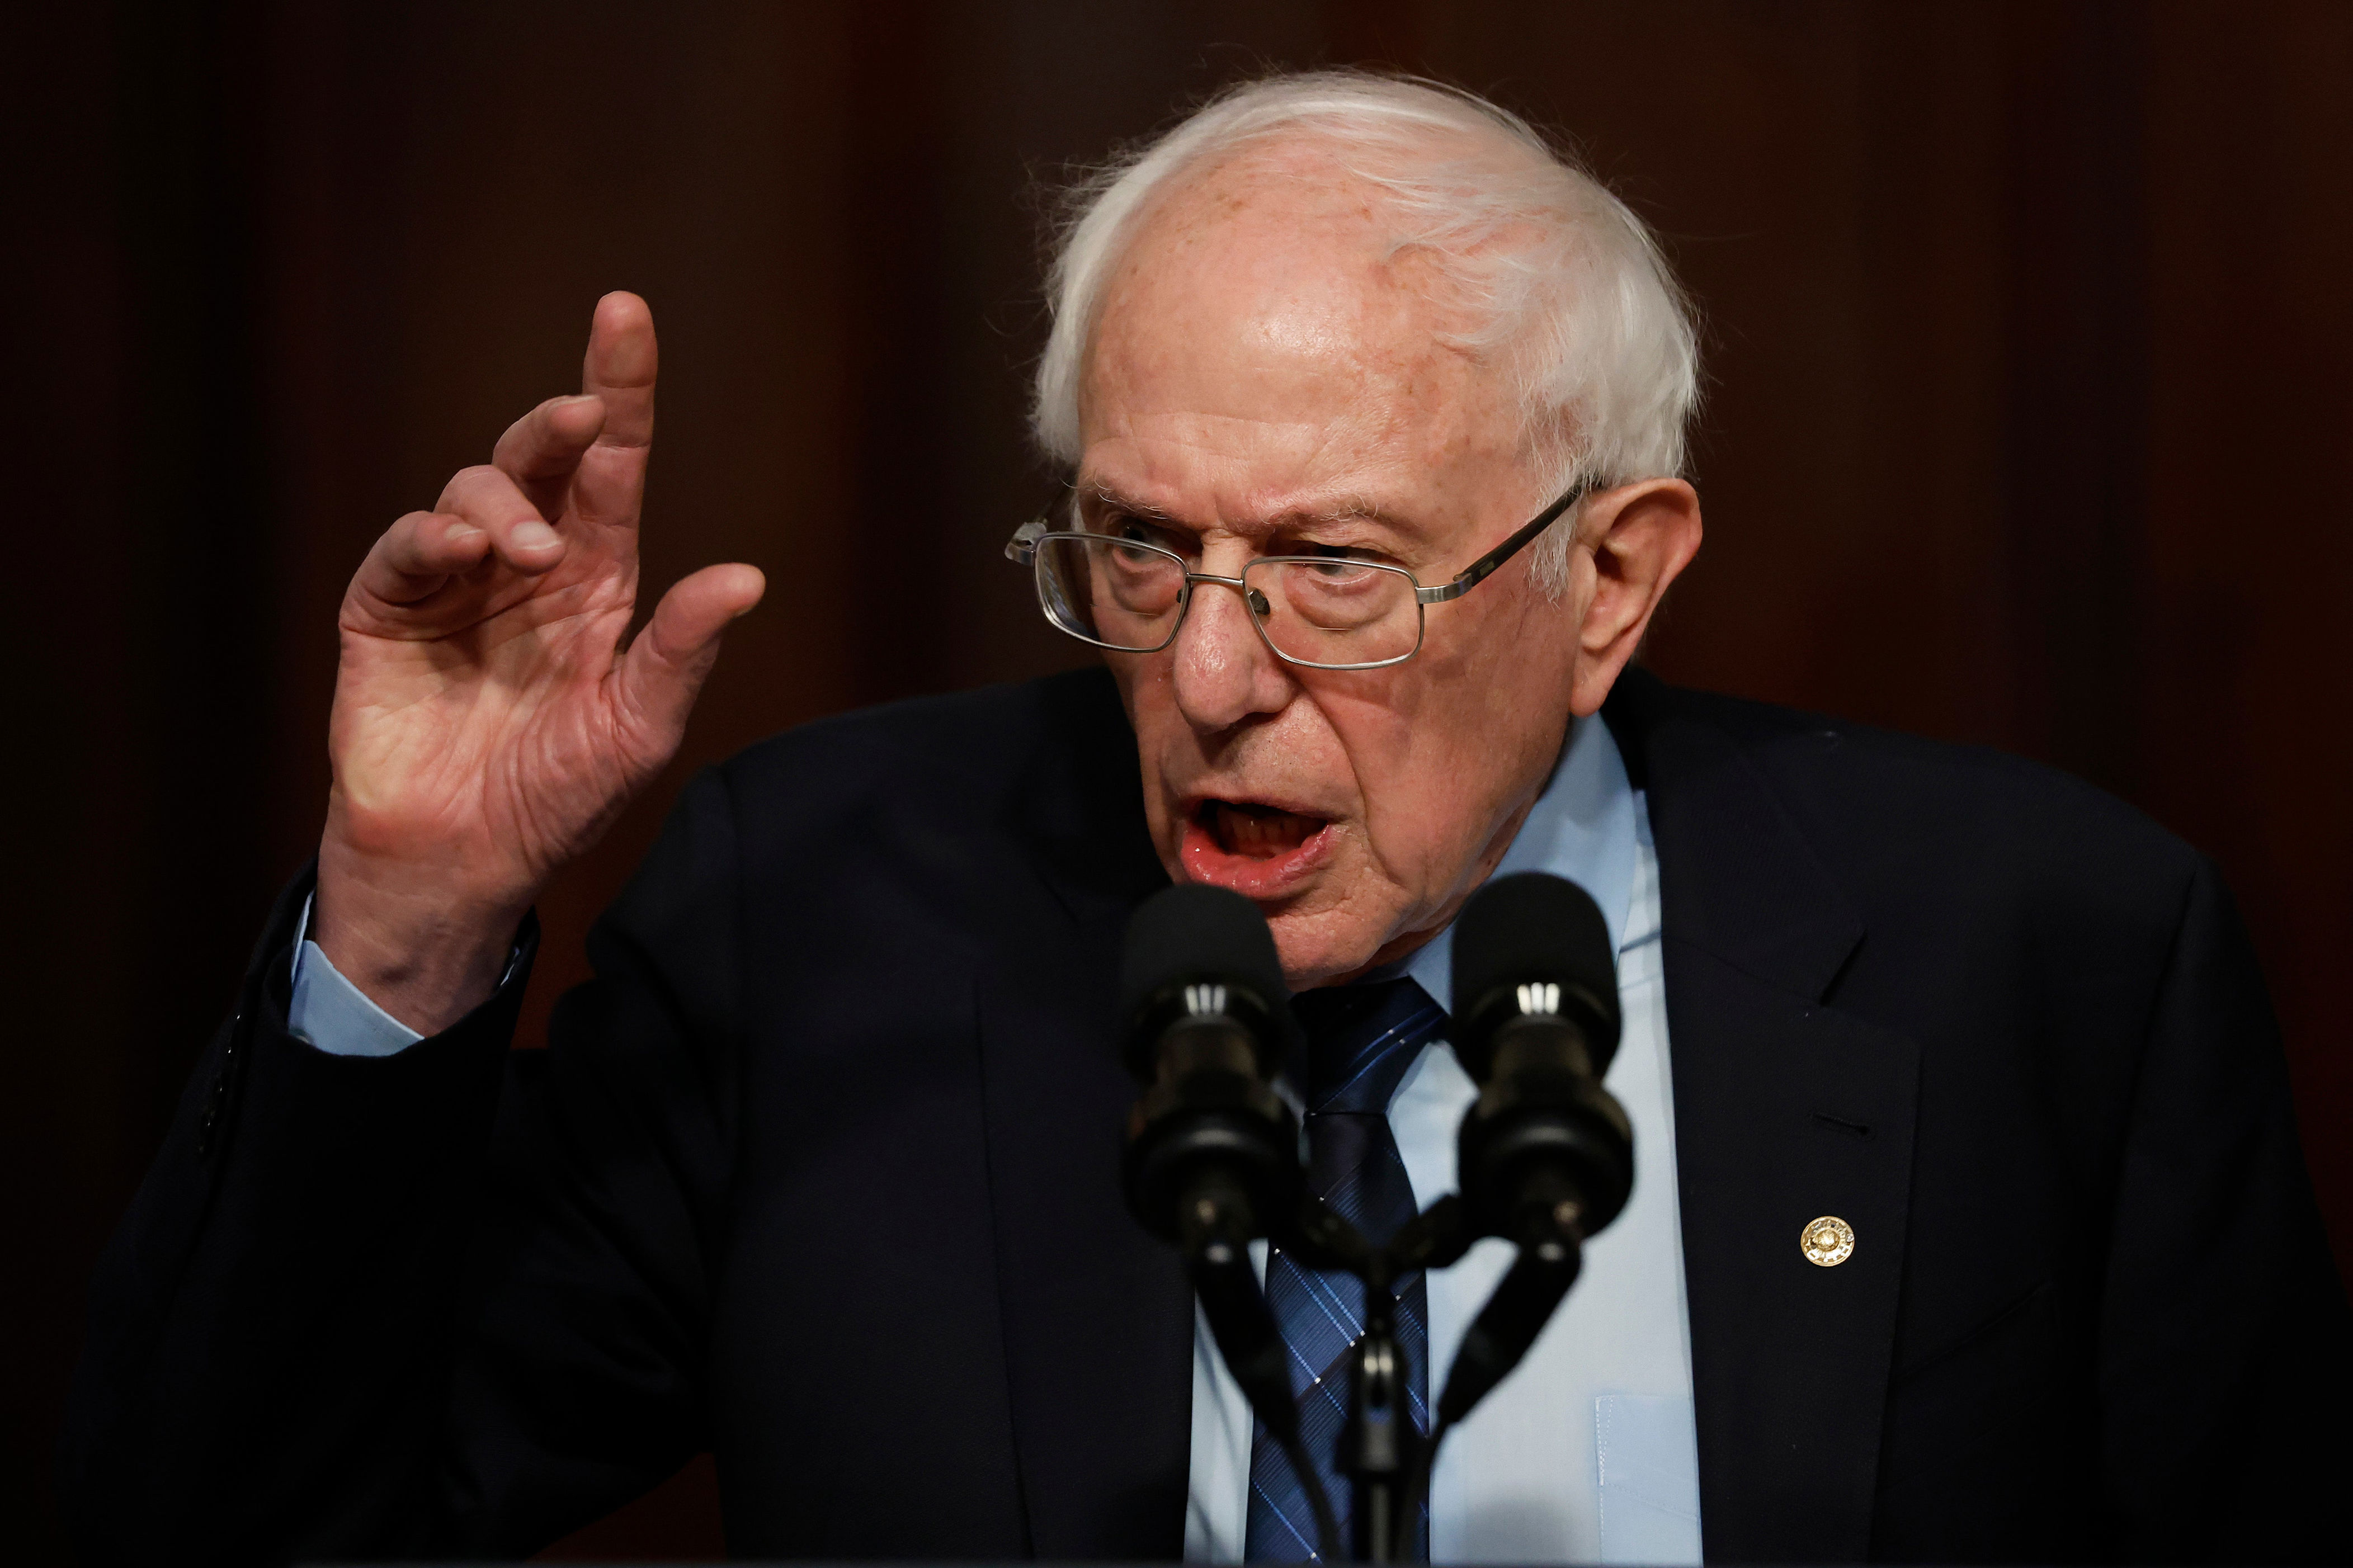 bernie sanders expresses support for pro-palestine protests